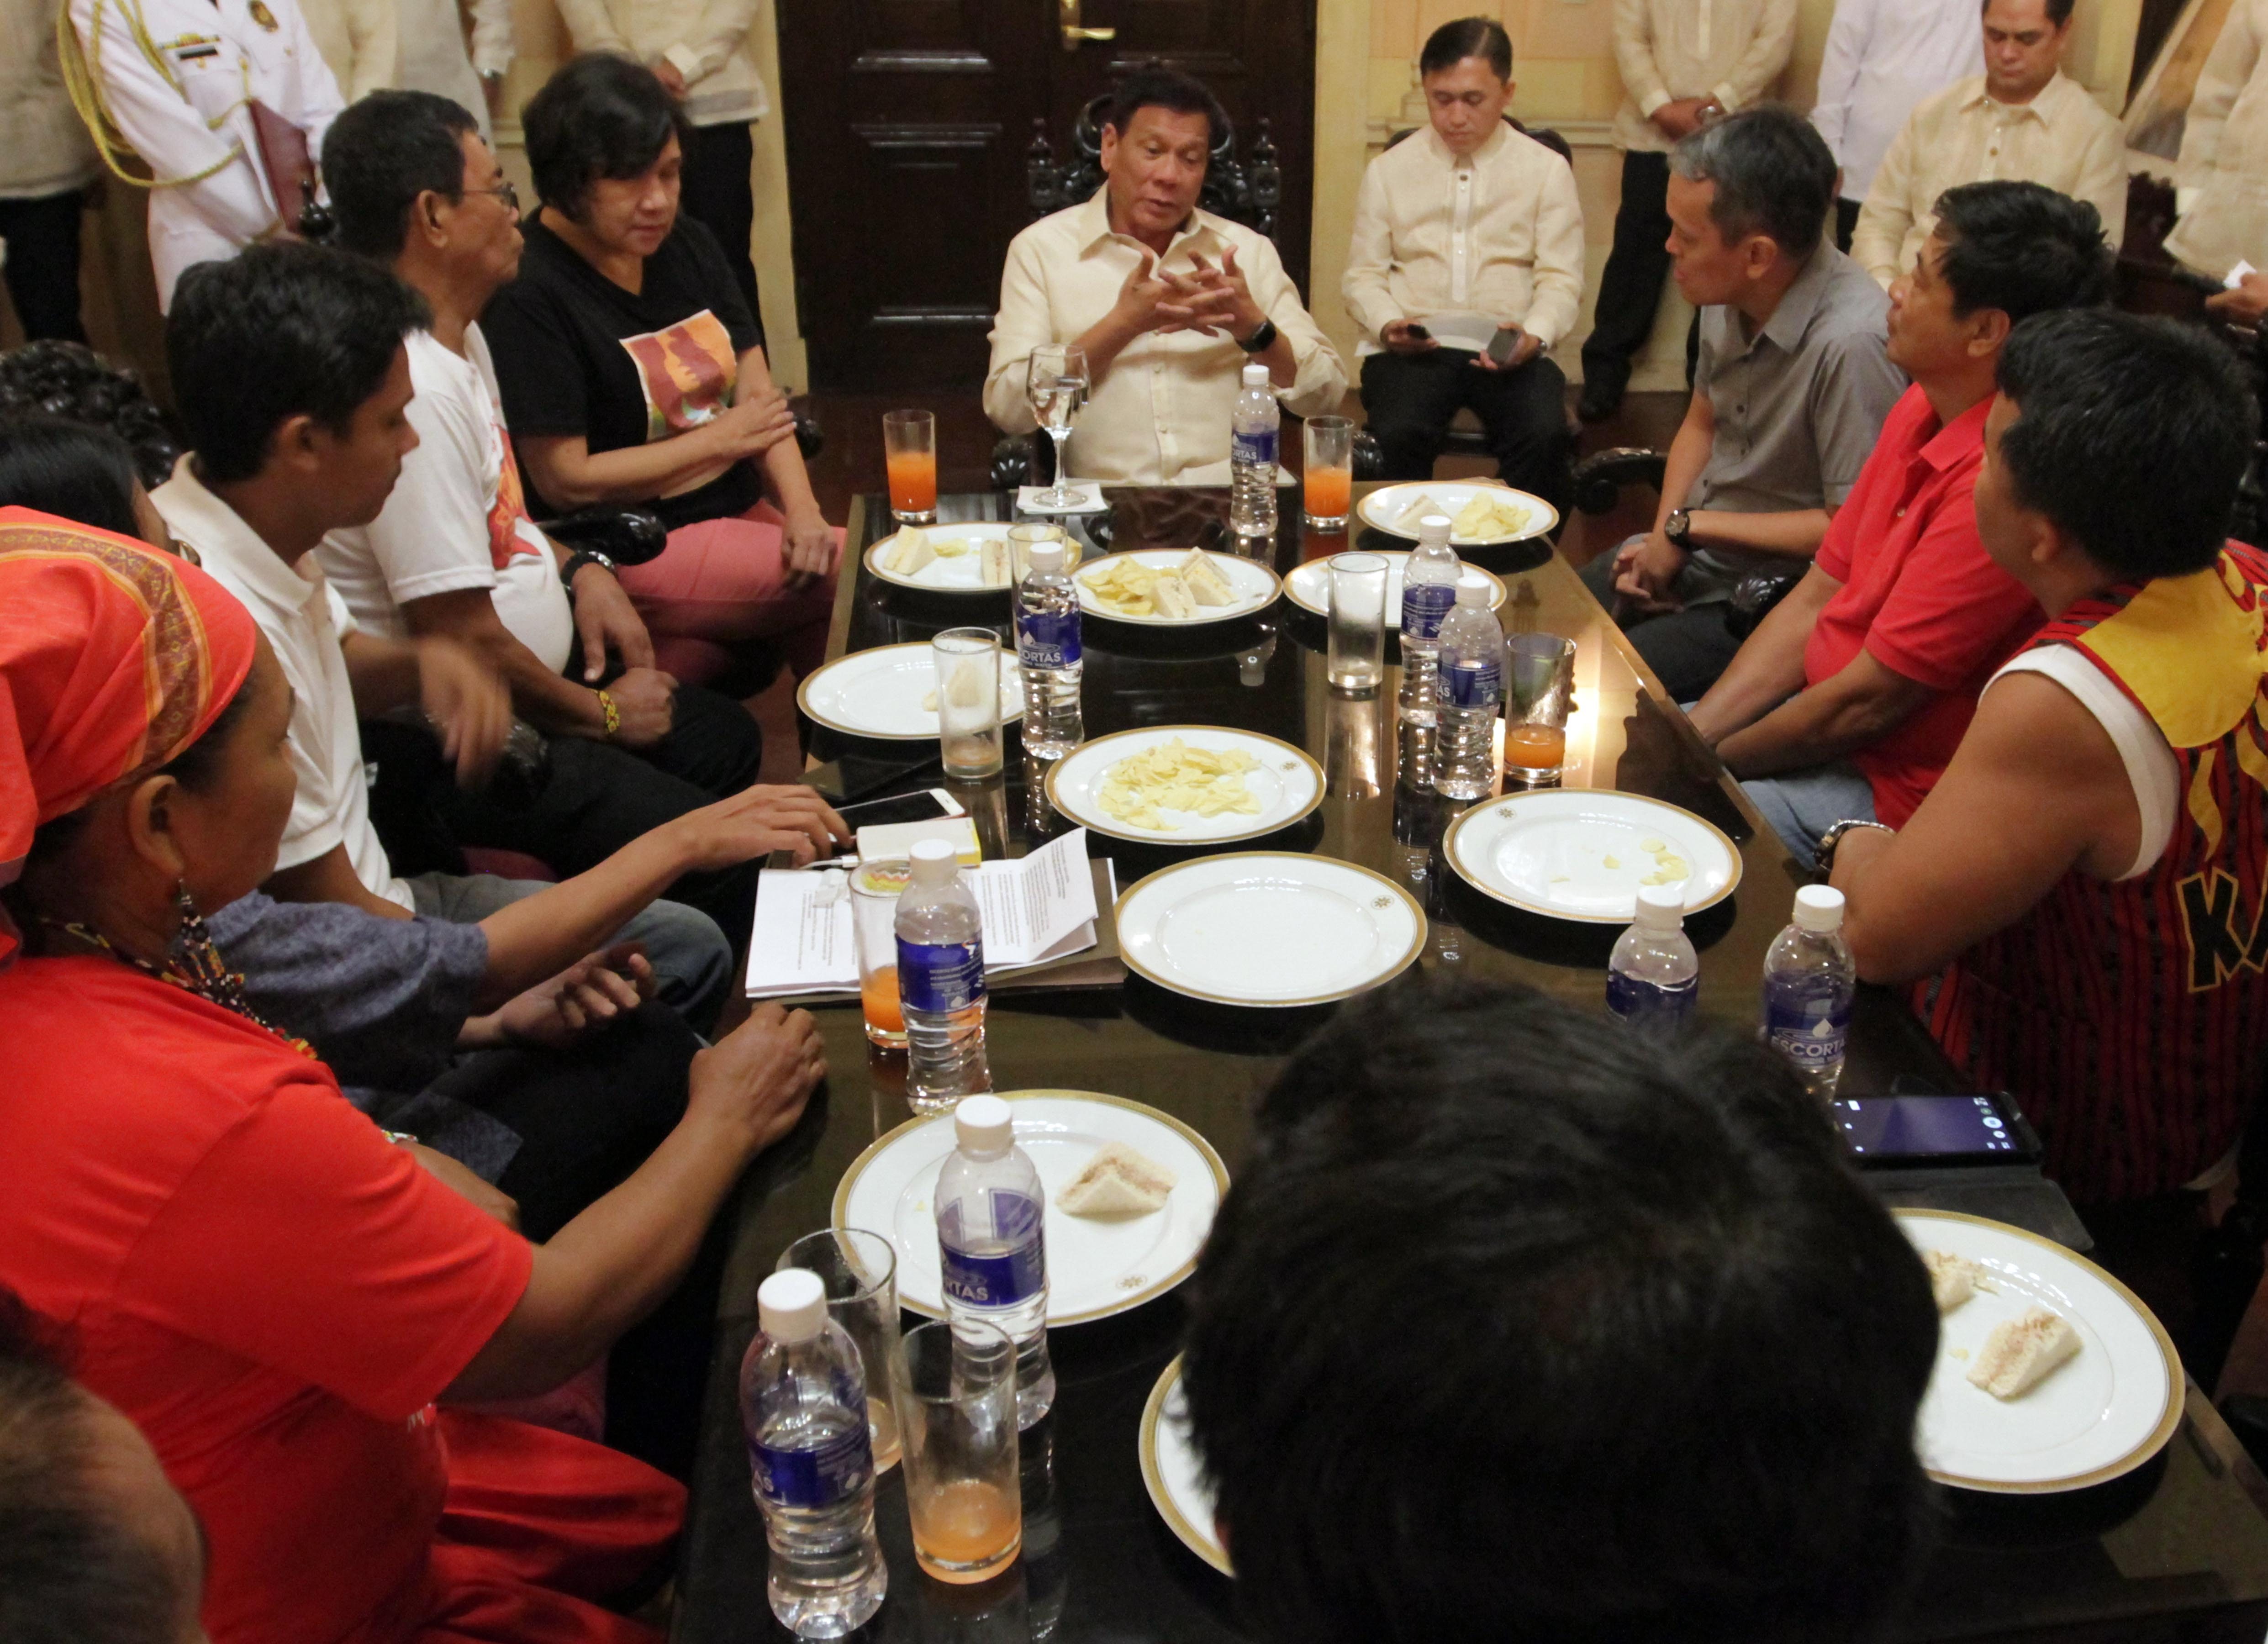 MILITANTS IN MALACAÑANG. Activist leaders discuss the 'People's Agenda for Change' with President Rodrigo Duterte after he takes oath as the next President of the Republic of the Philippines 